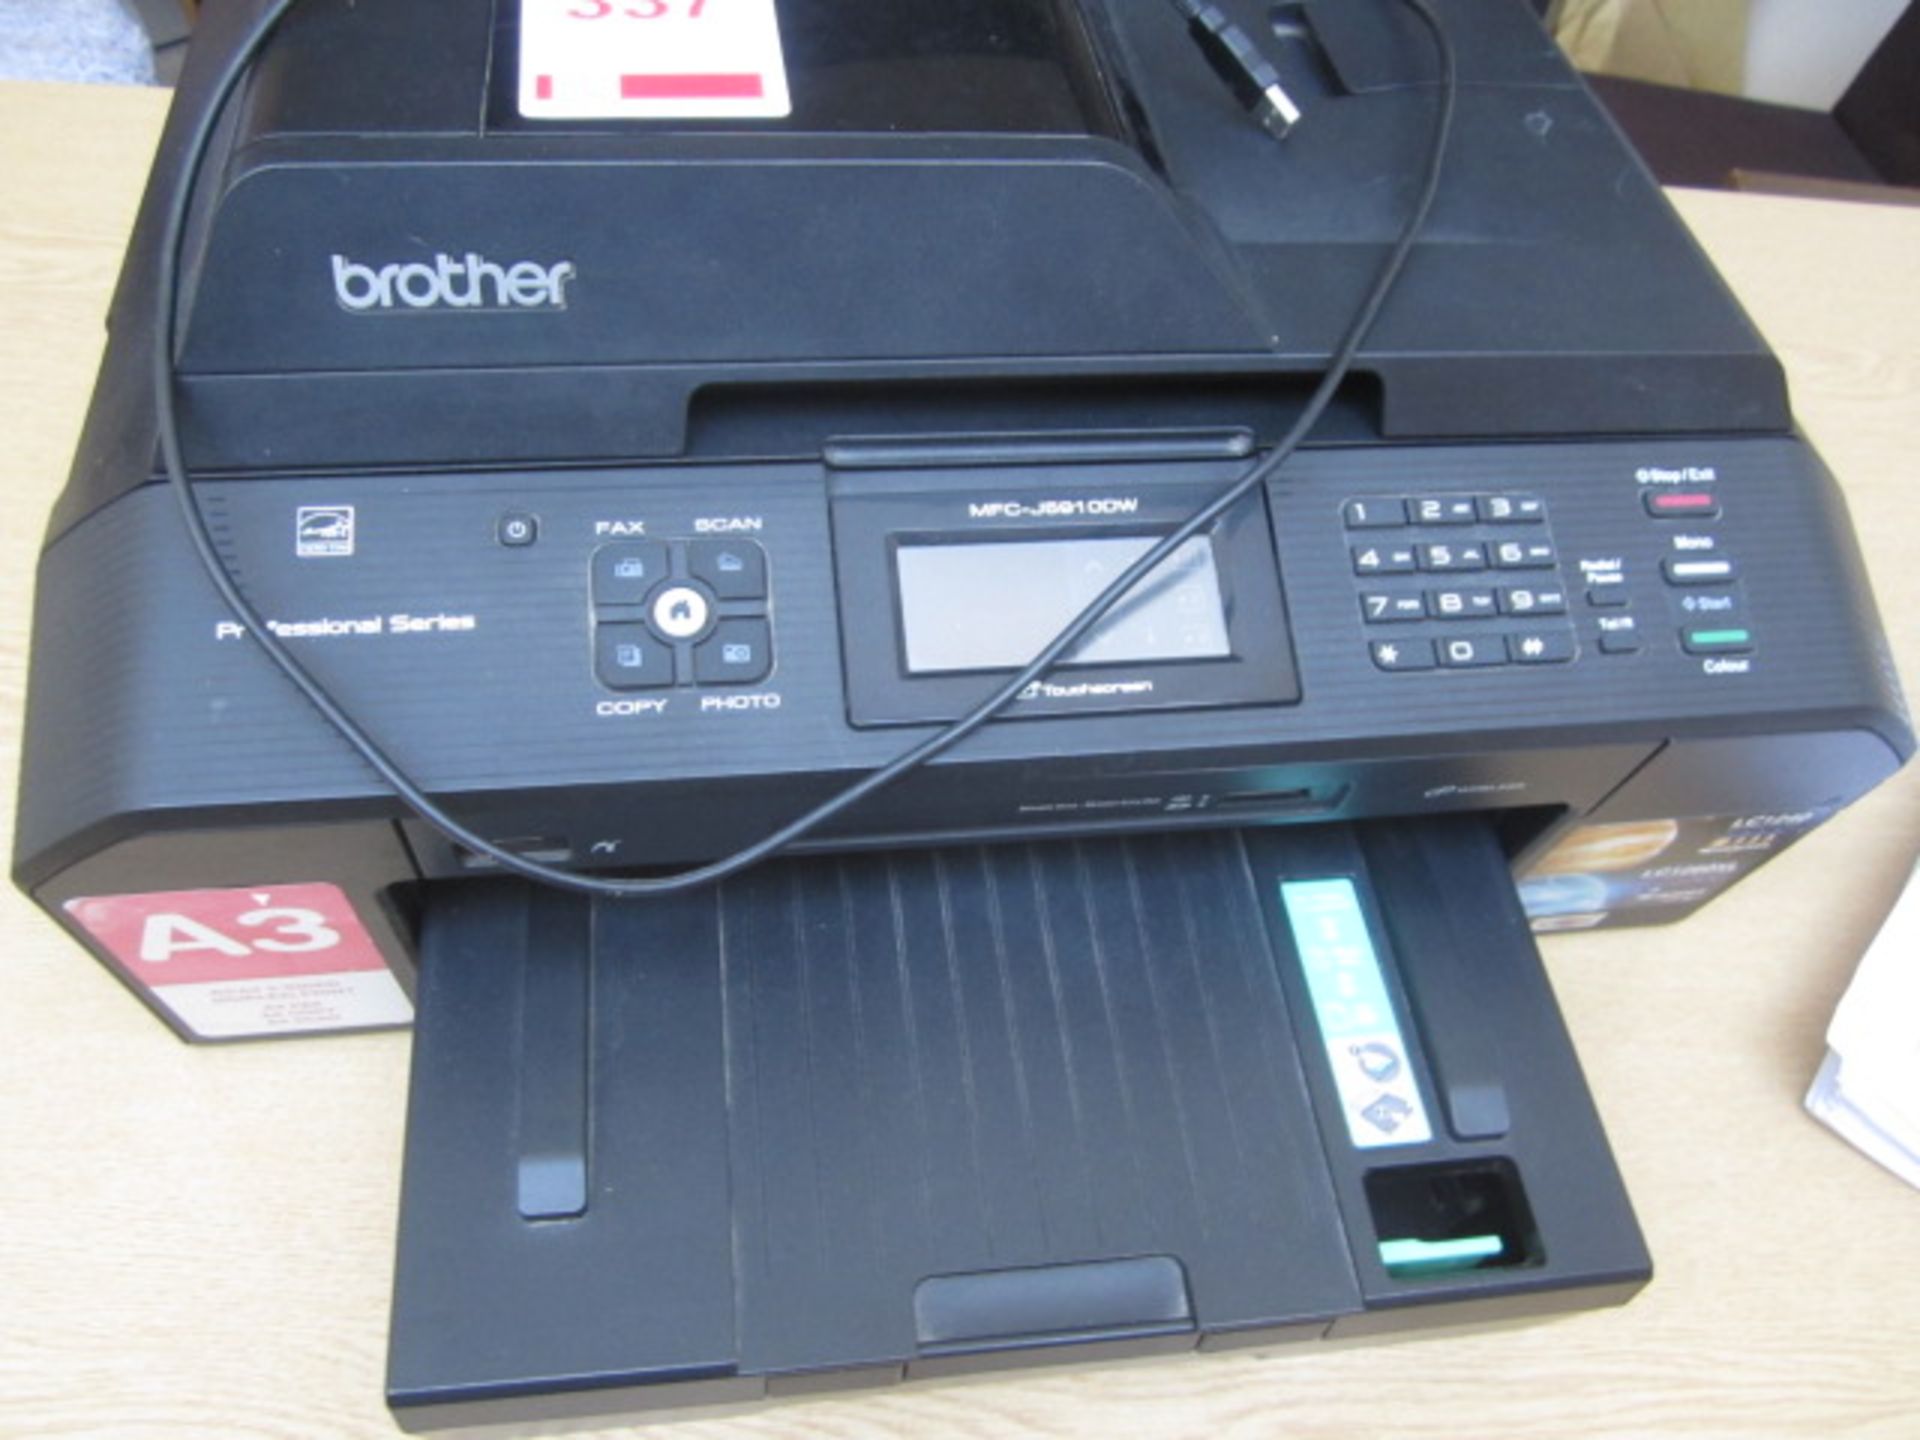 Brother Professional Series MFC-J5910DW wireless printer - Image 2 of 2